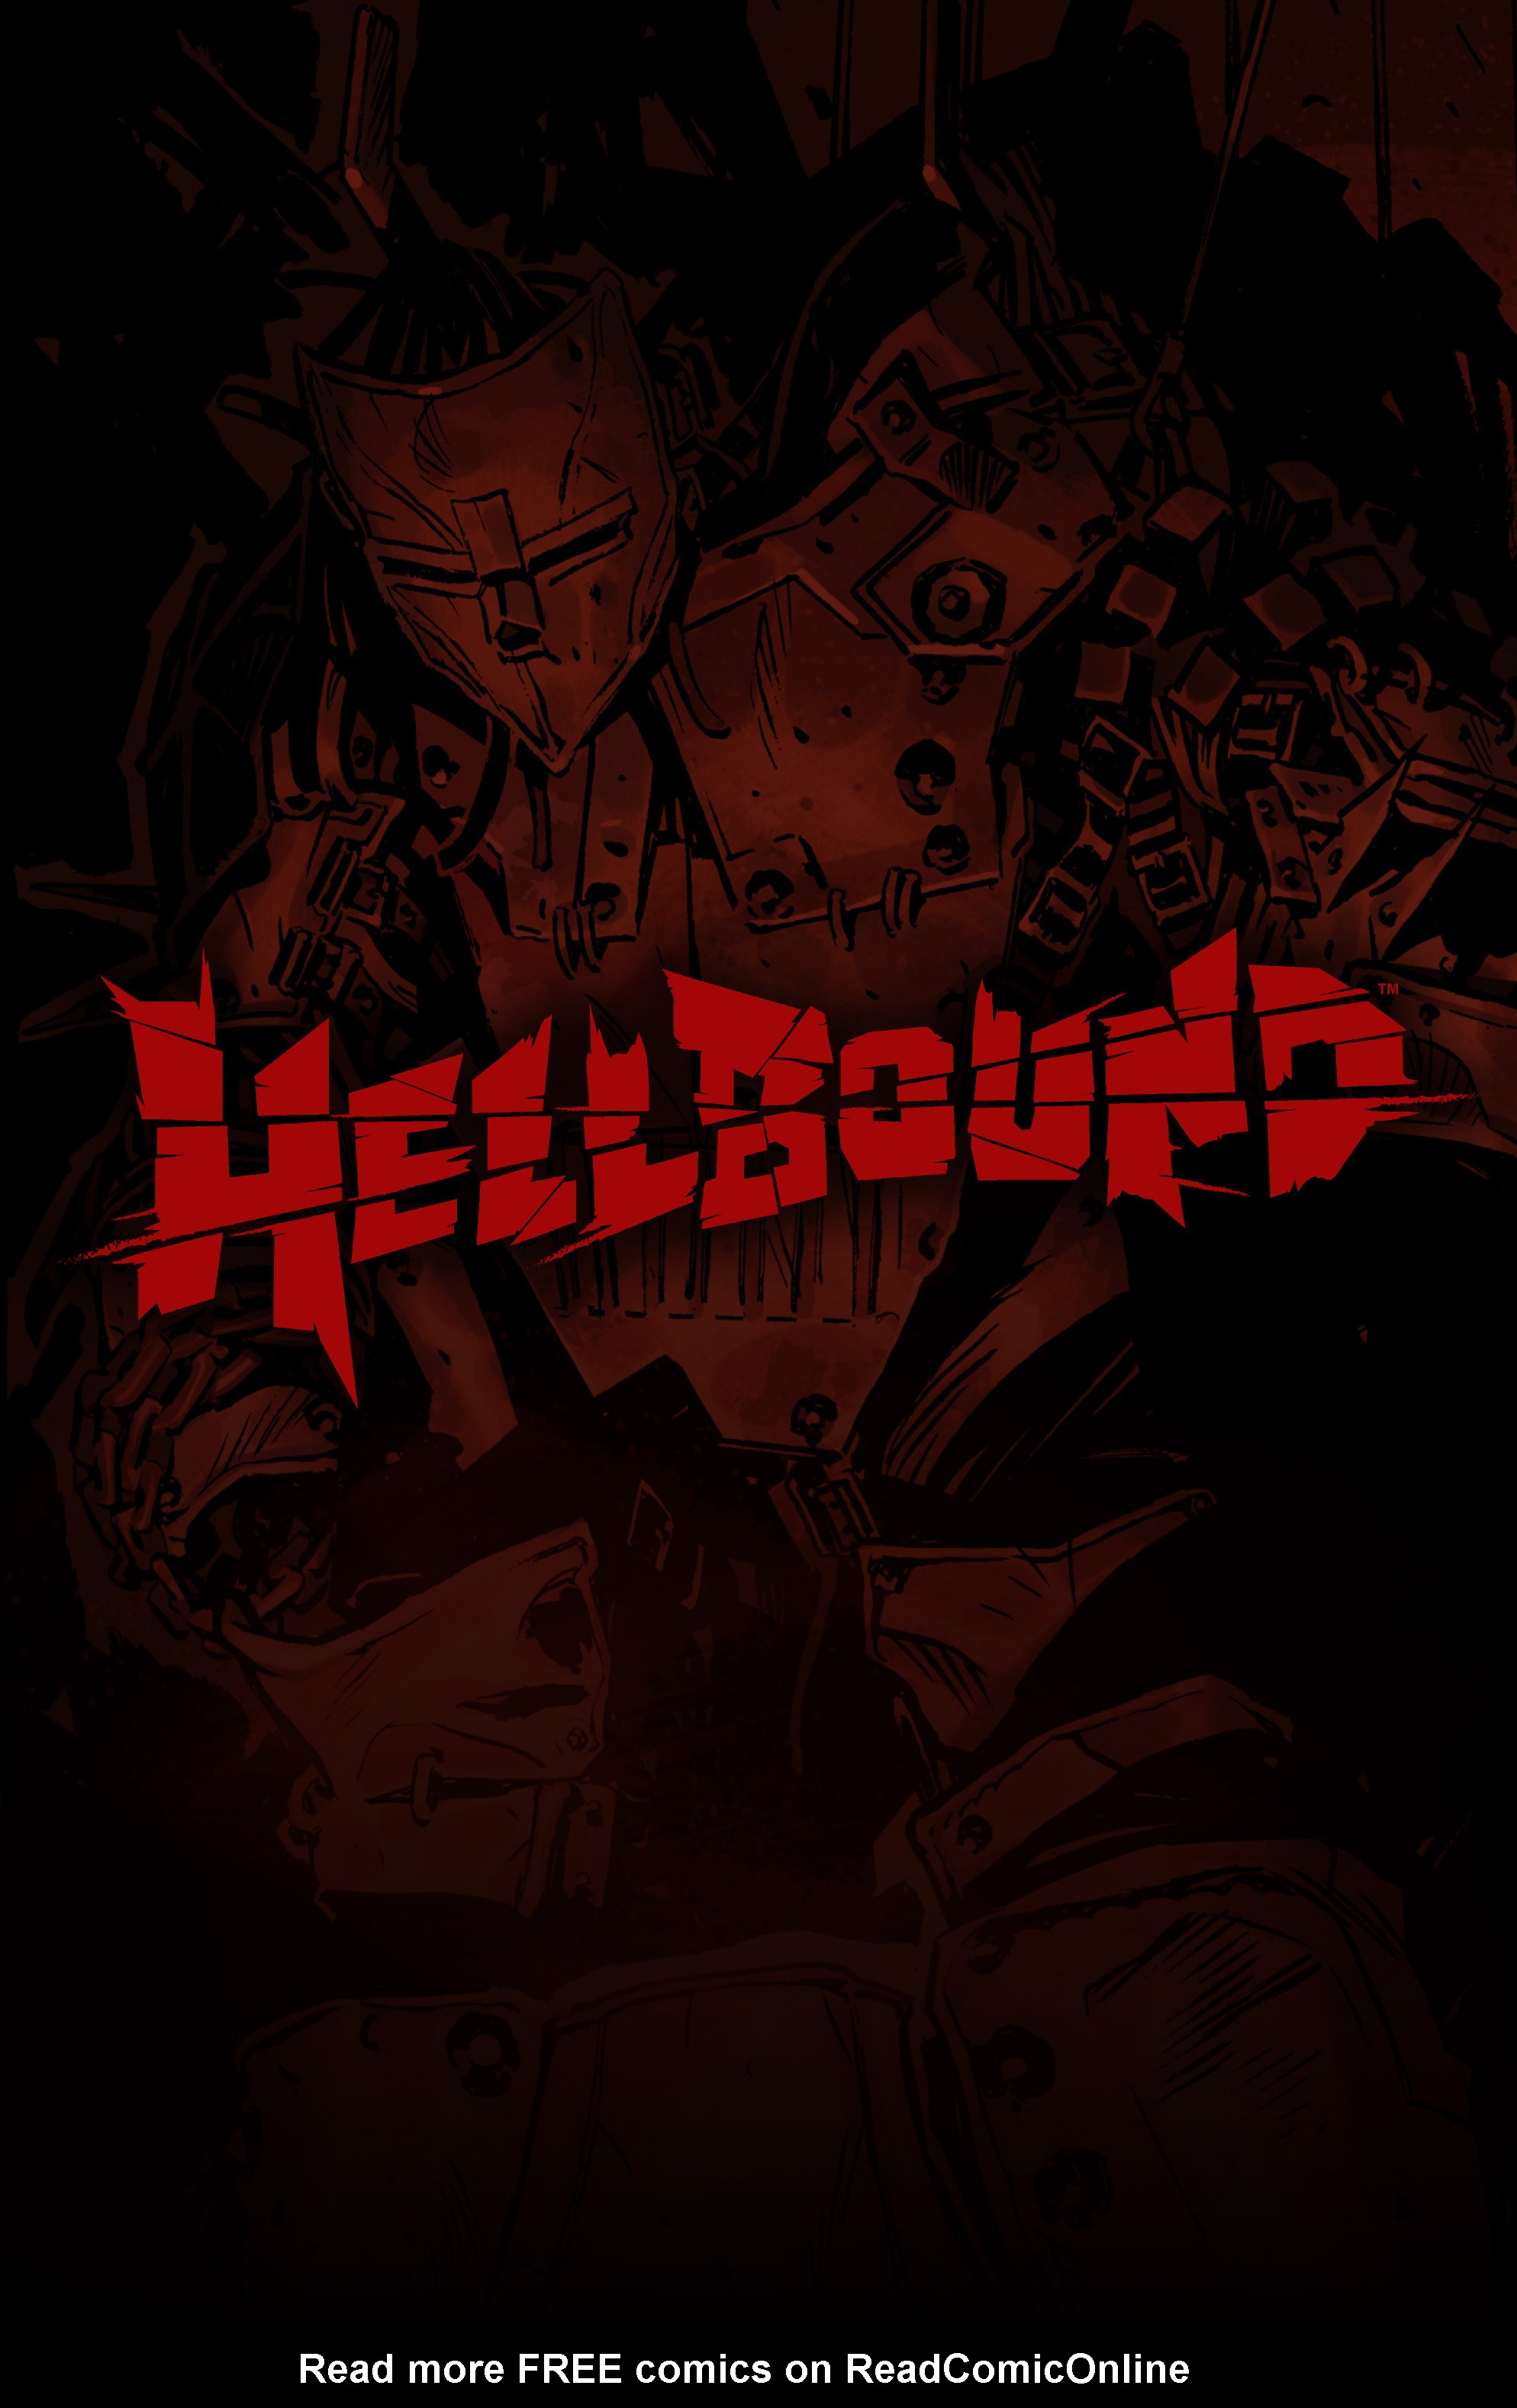 Read online Hellbound comic -  Issue # TPB - 2